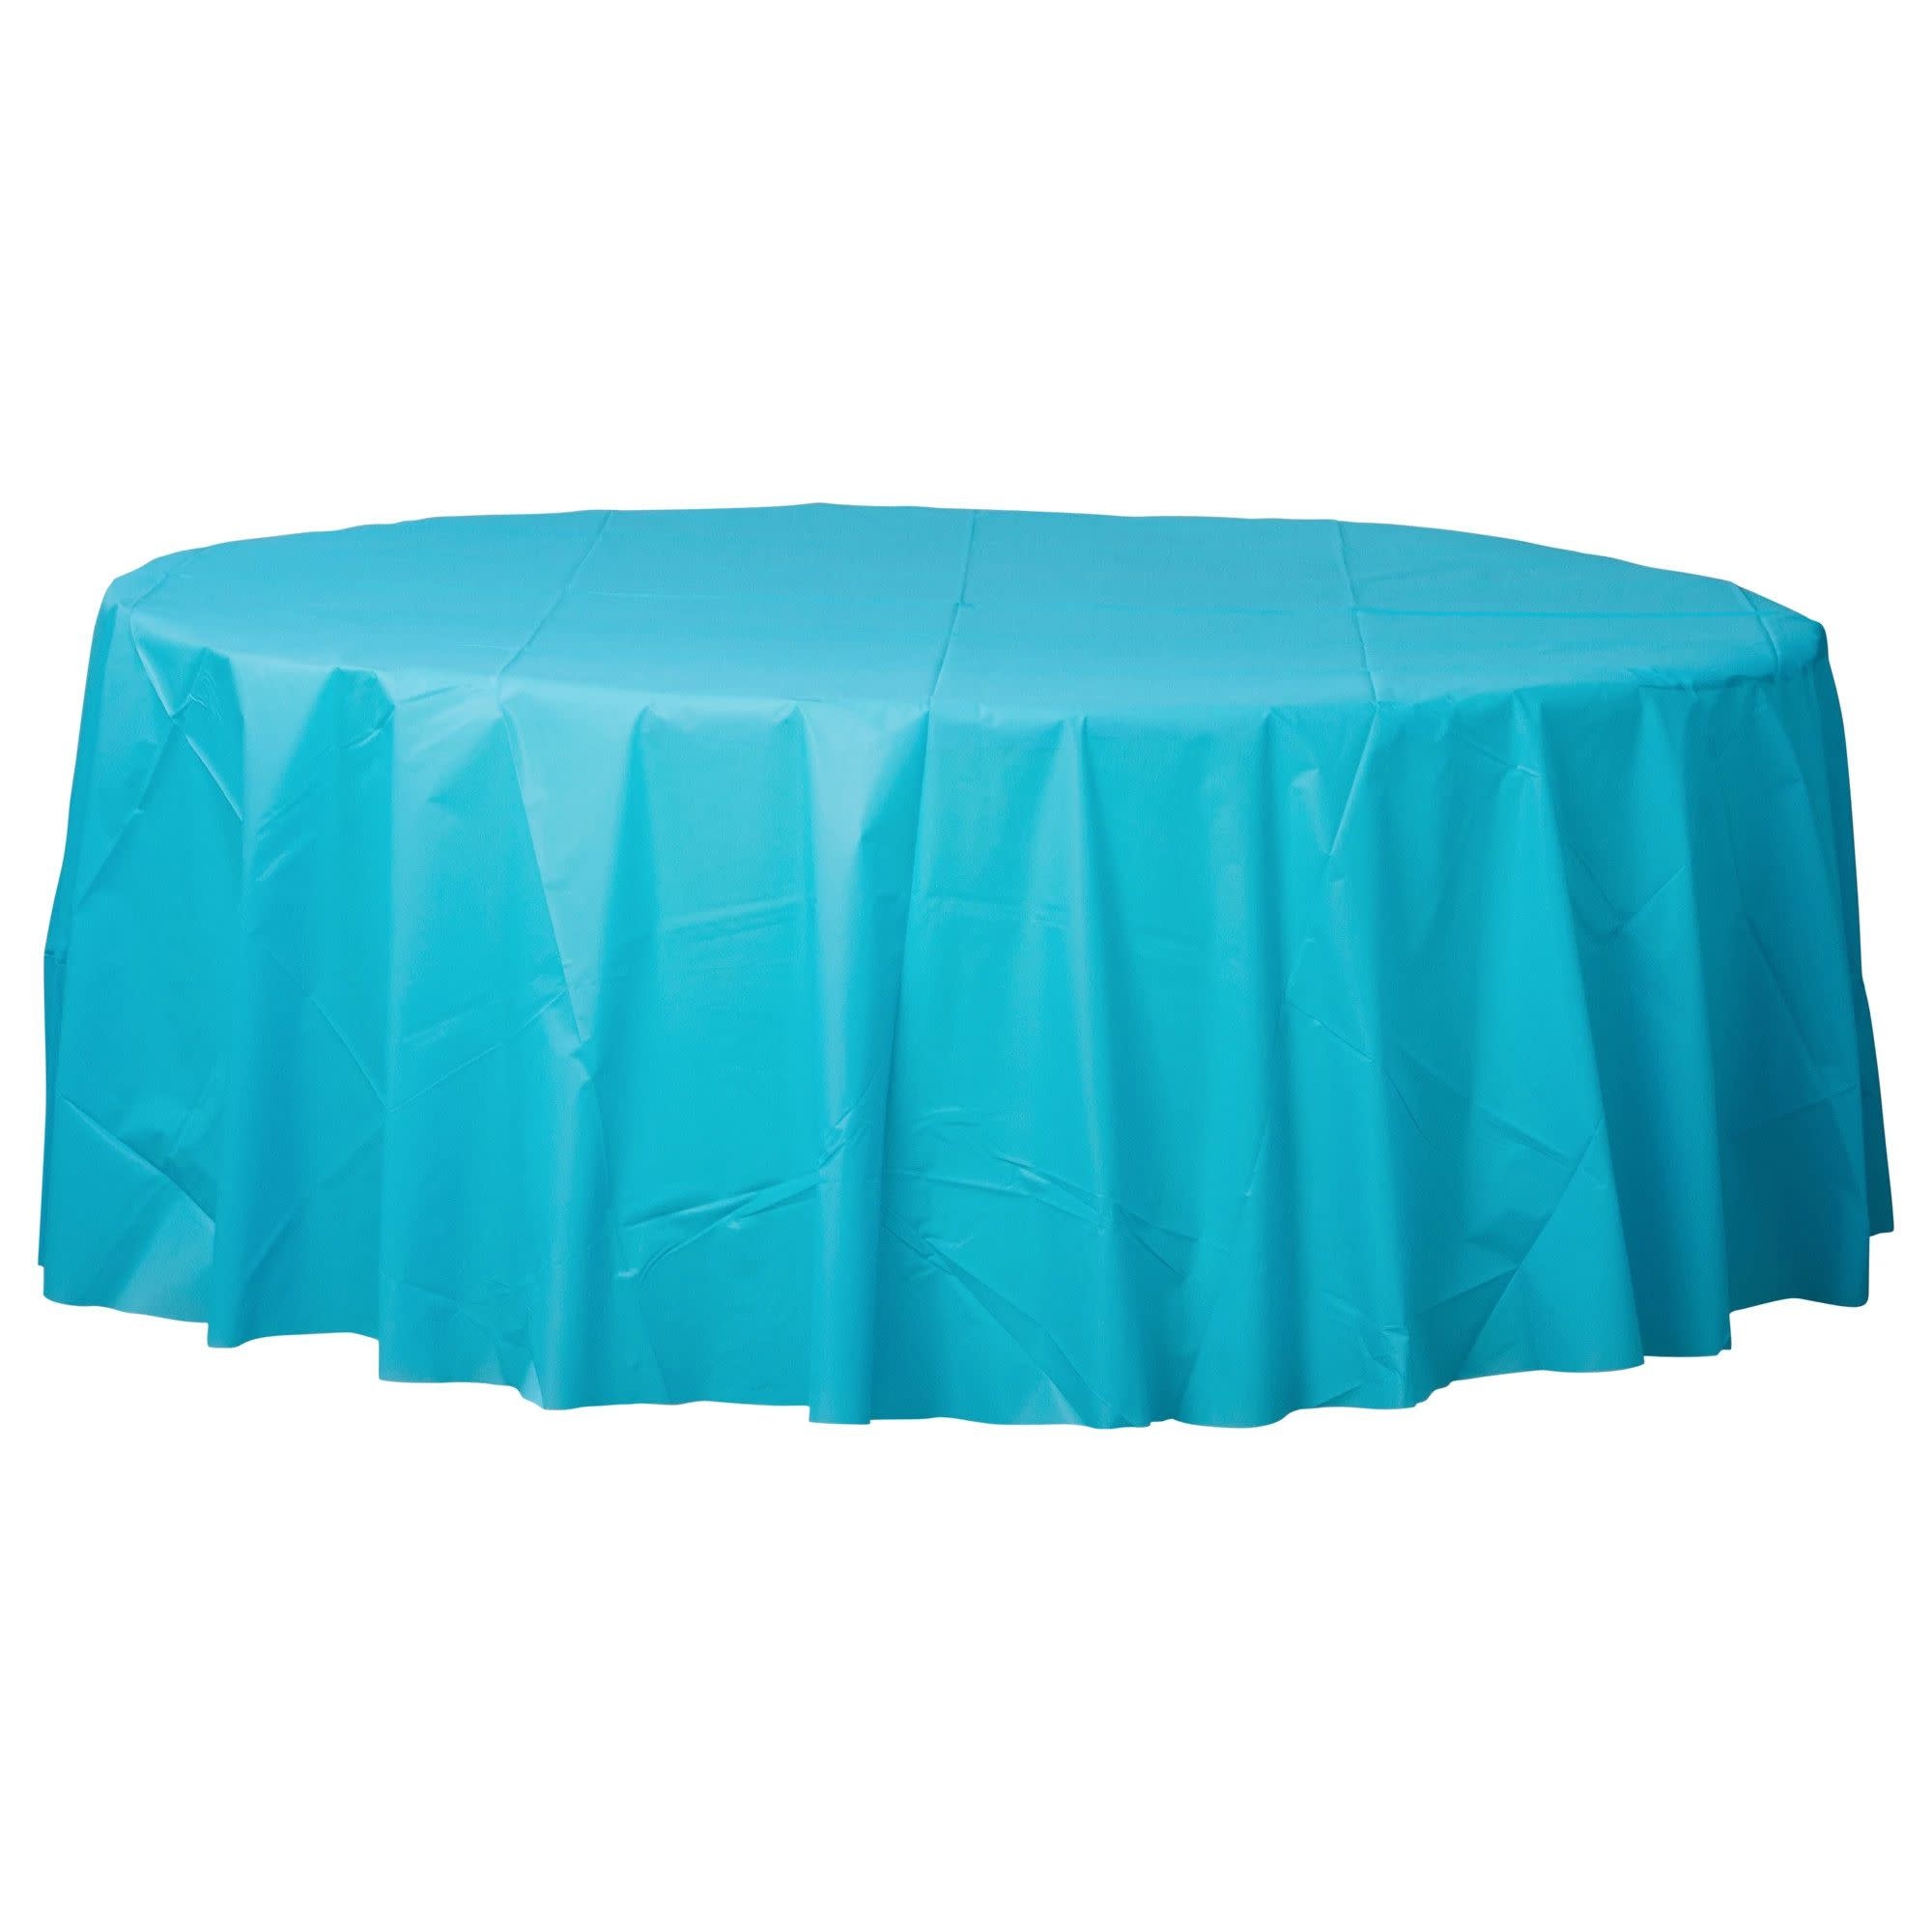 84" Round Plastic Table Cover - Caribbean